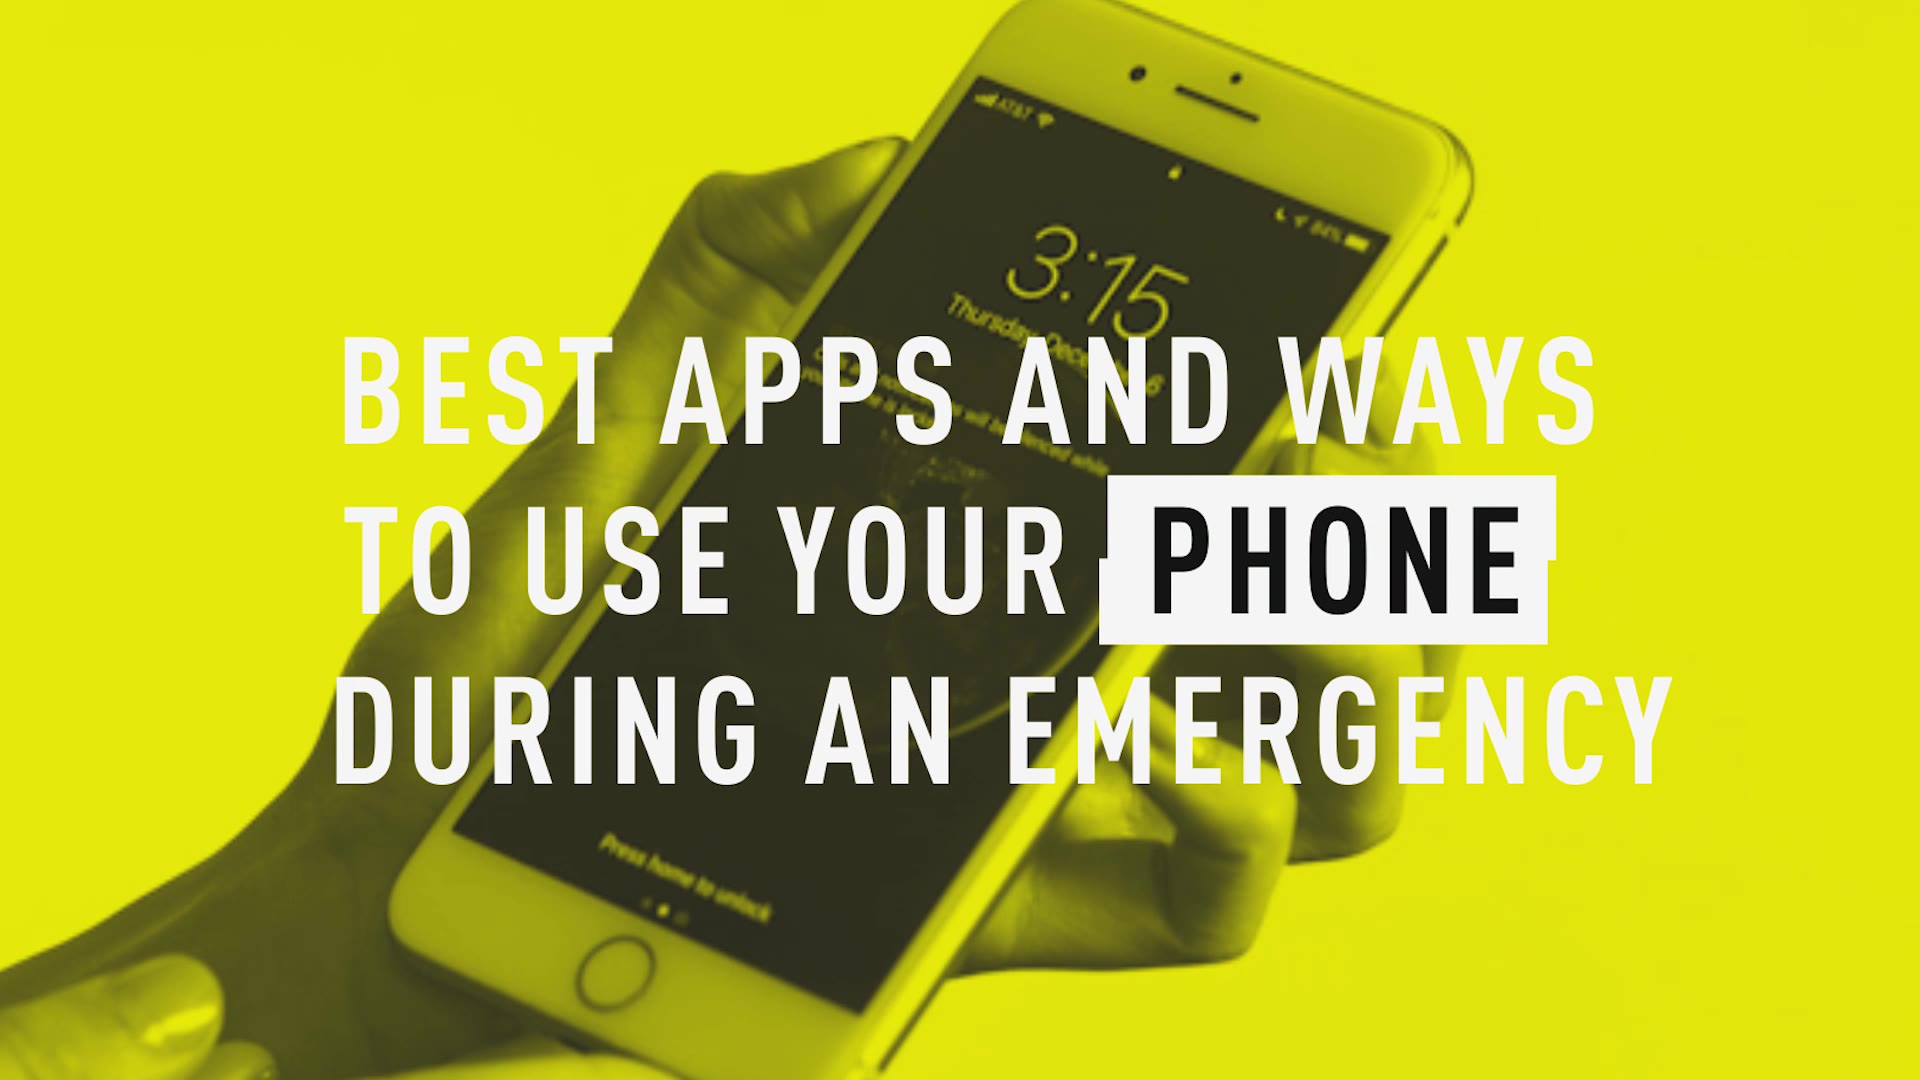 Best Apps and Ways to Use Your Phone During an Emergency